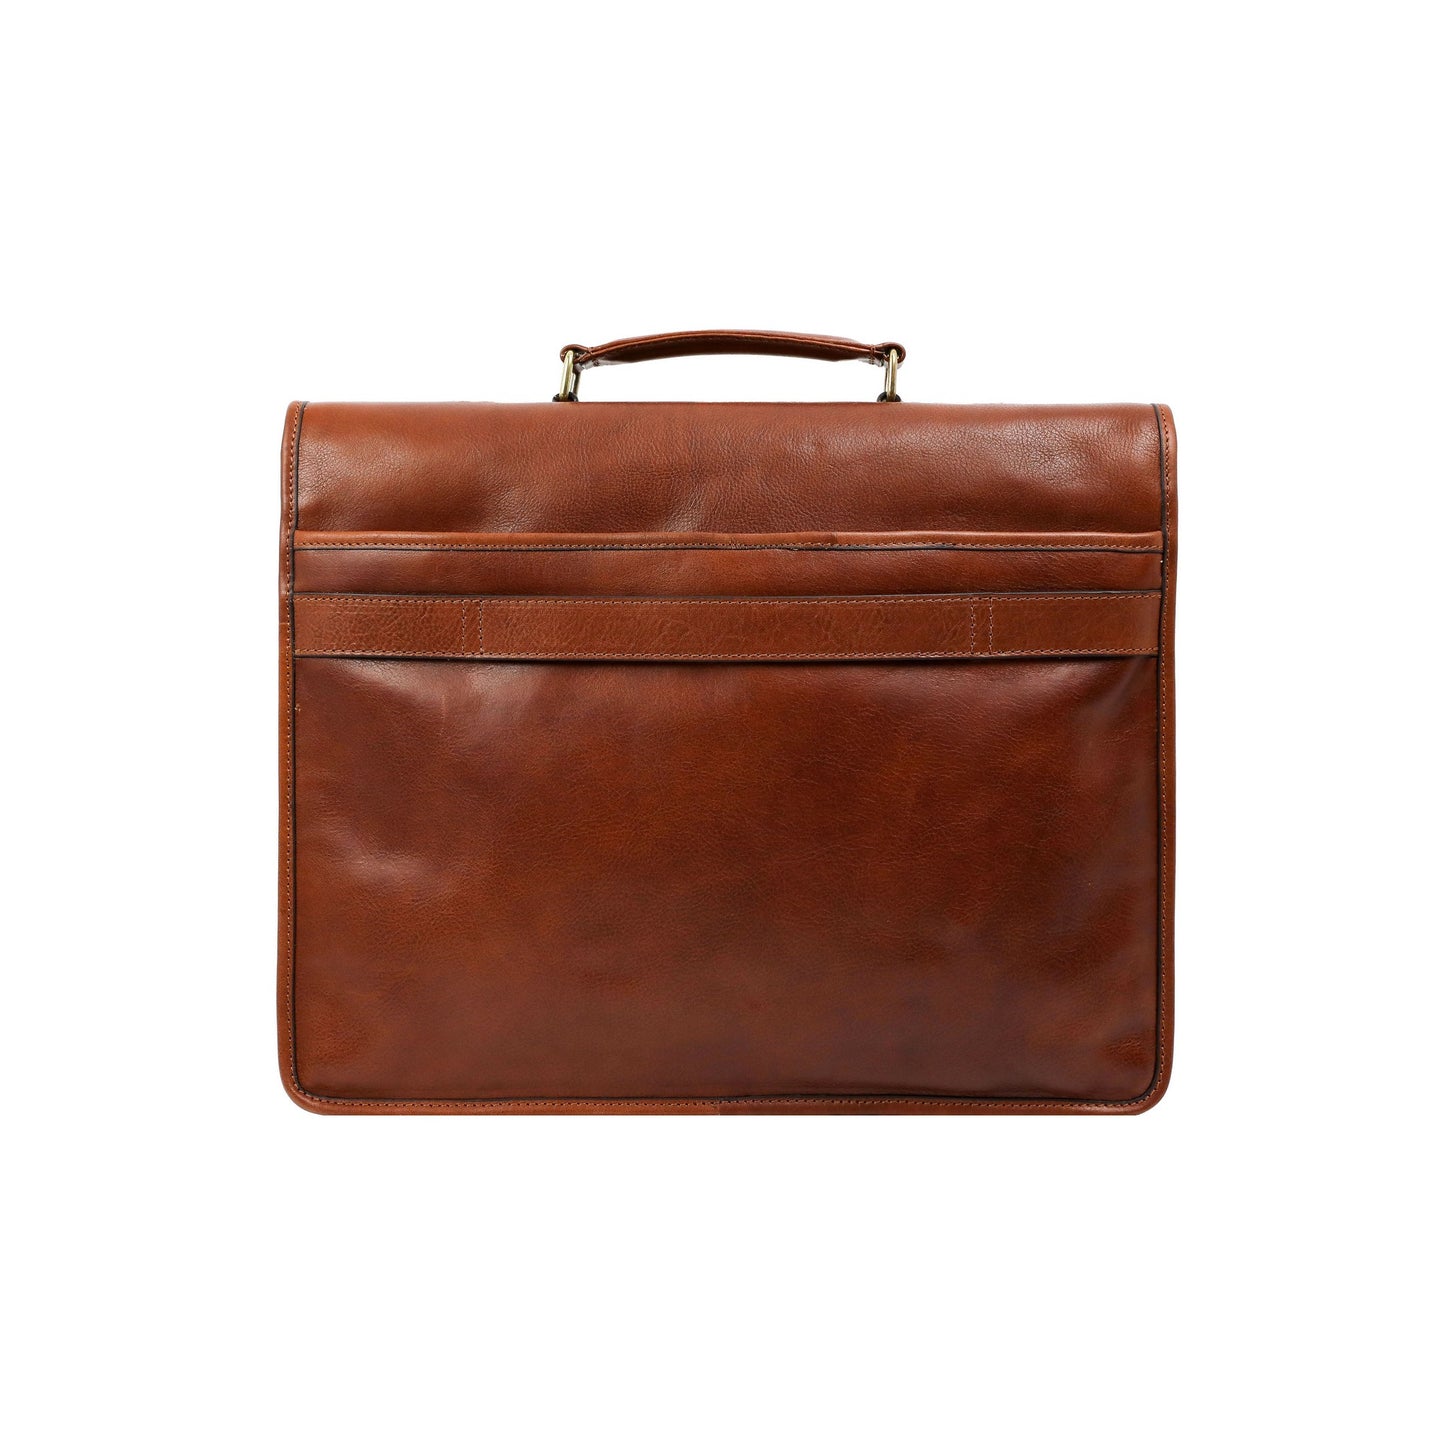 Leather Briefcase, Satchel Bag - The Time Machine